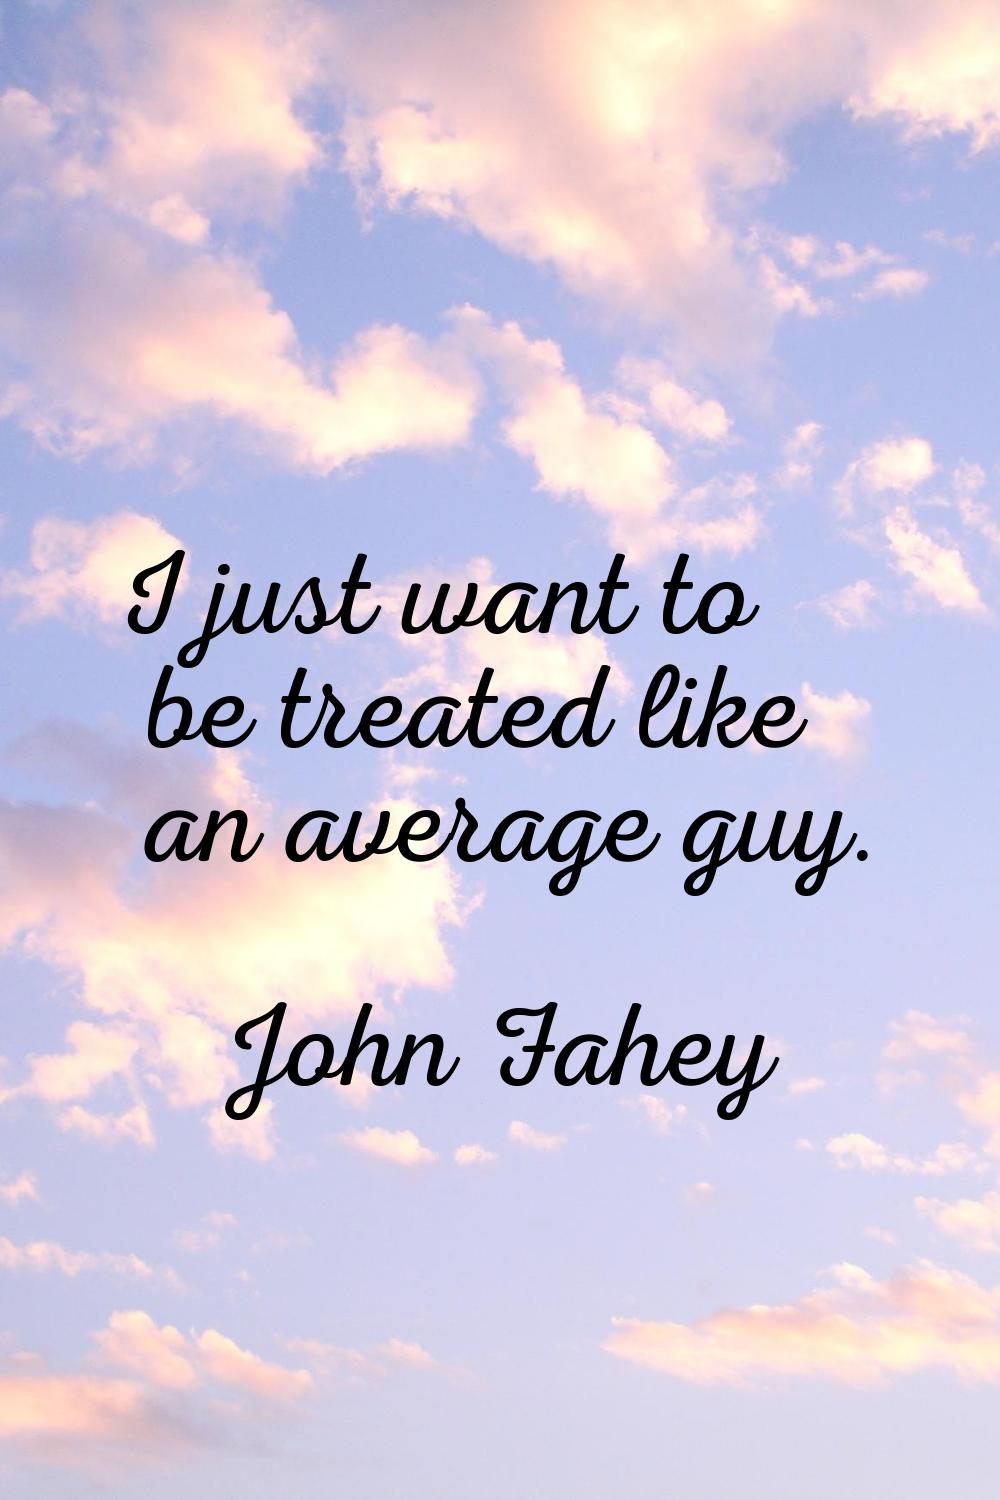 I just want to be treated like an average guy.